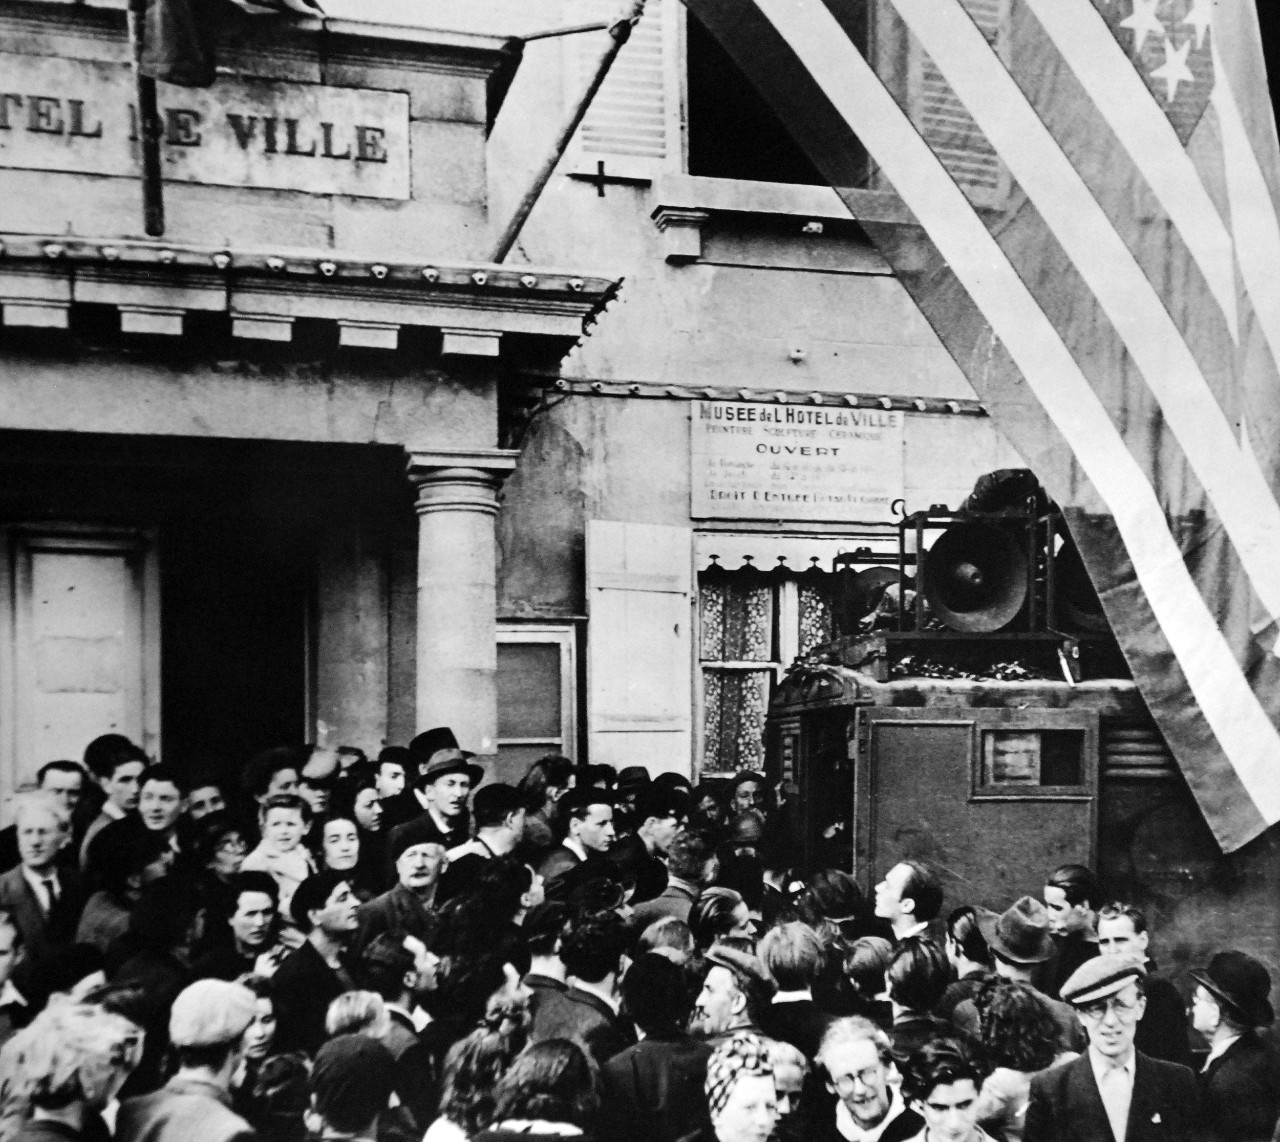 Lot 11611-15:   Liberation of France, World War II.  Civilians crowd in around an Allied broadcasting truck outside the city hall during the liberation ceremonies.  Cherbourg, France, summer 1944.    Office of War Information Photograph by Weston Hayes, 28370. Courtesy of the Library of Congress.  (2016/02/25)